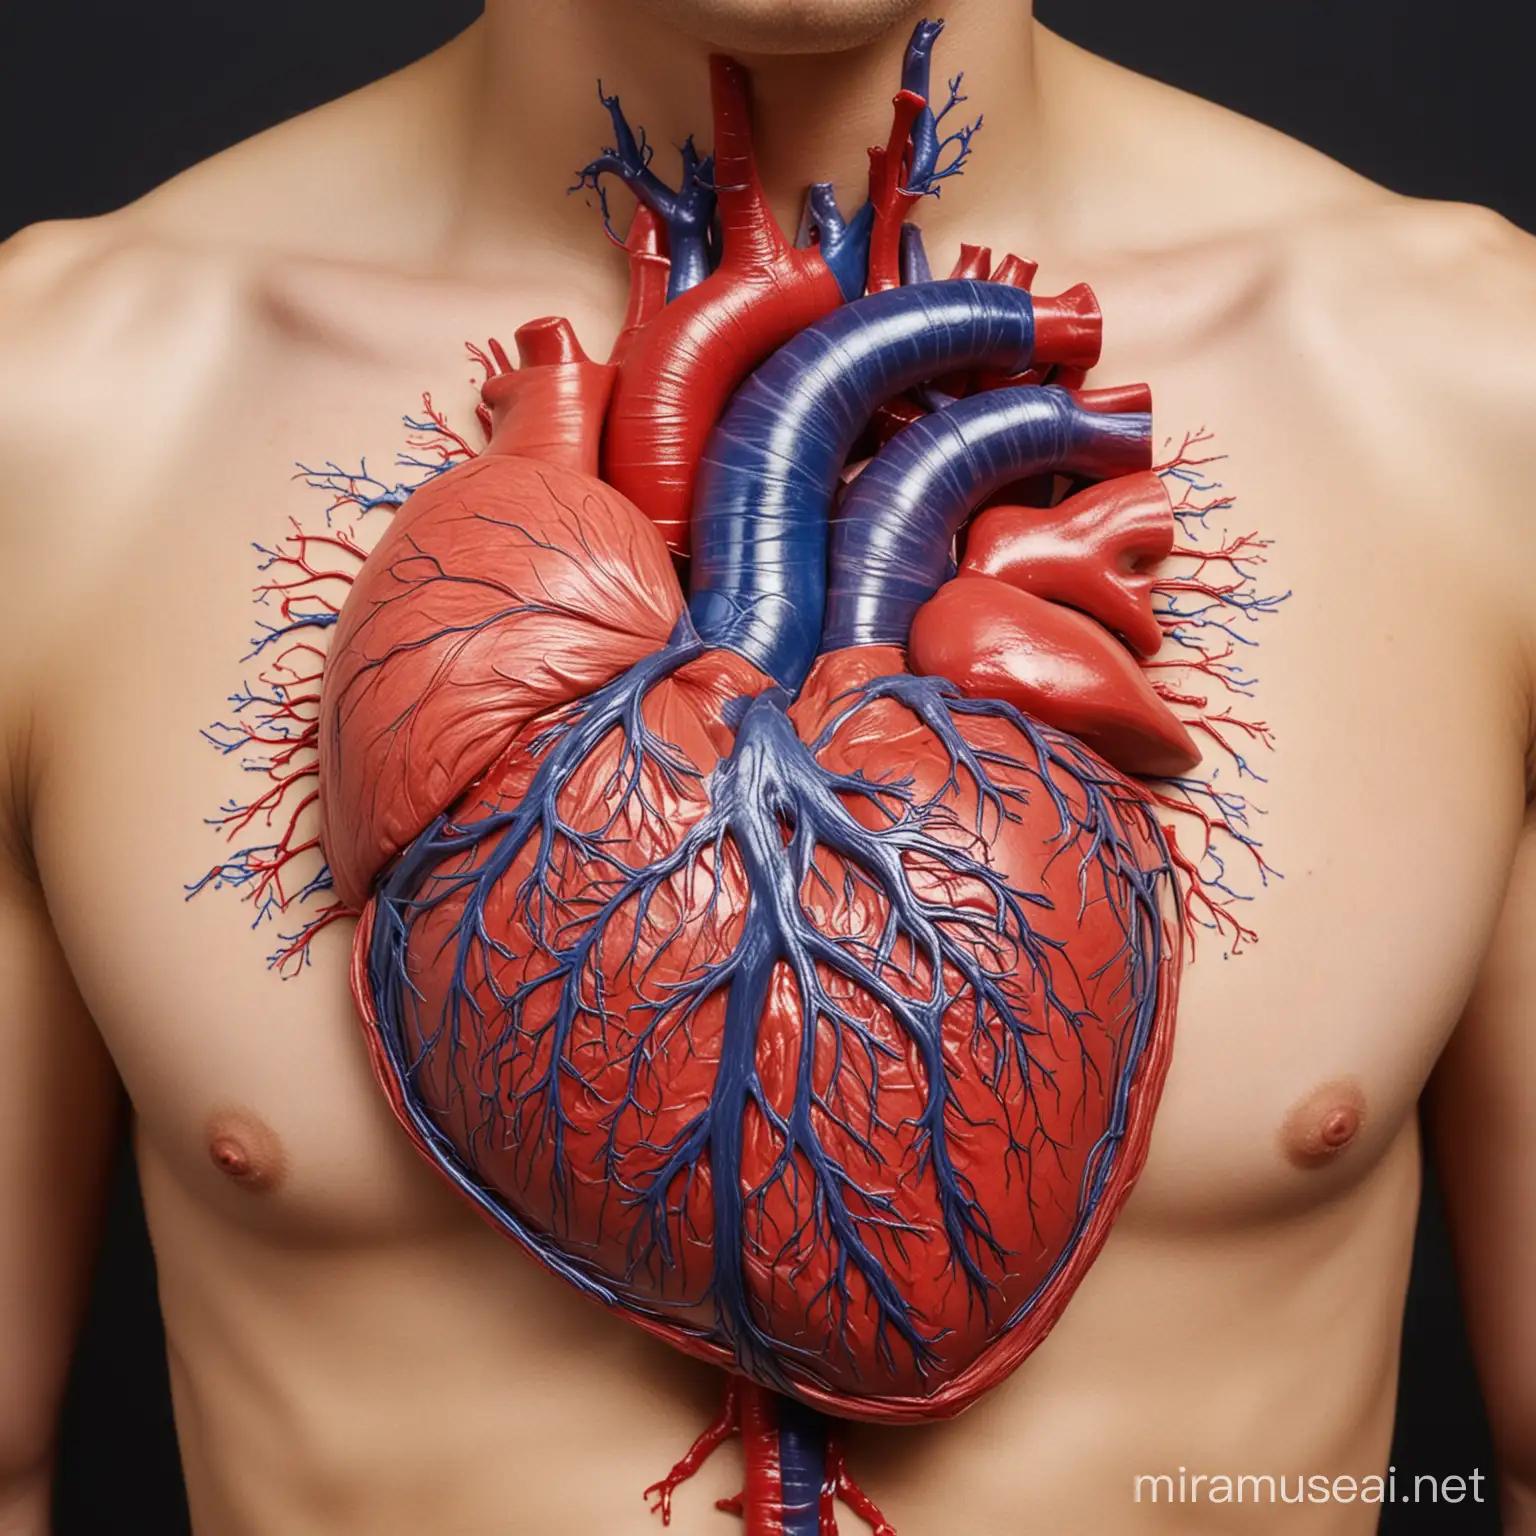 Detailed Human Circulatory System Illustration with Visible Veins and Arteries